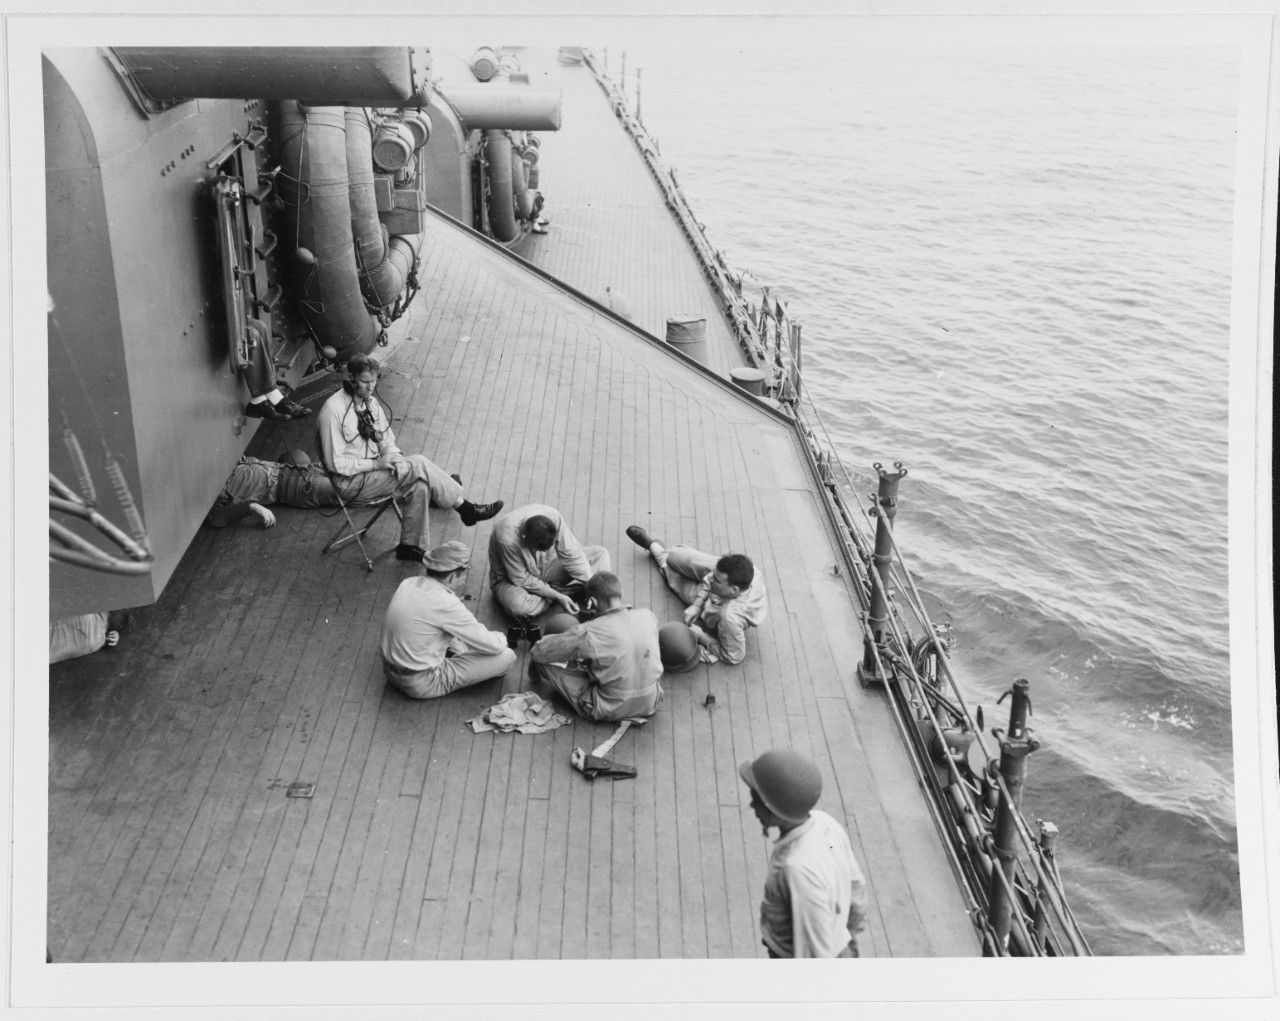 Men rest on Chicago’s deck beside 8-inch turret No. II, 9 August 1942. The view looks forward on the starboard side, as the ship appears to be underway. Note the lookout in the chair wearing the headphones, the .45 caliber M1911 pistol in the hol...